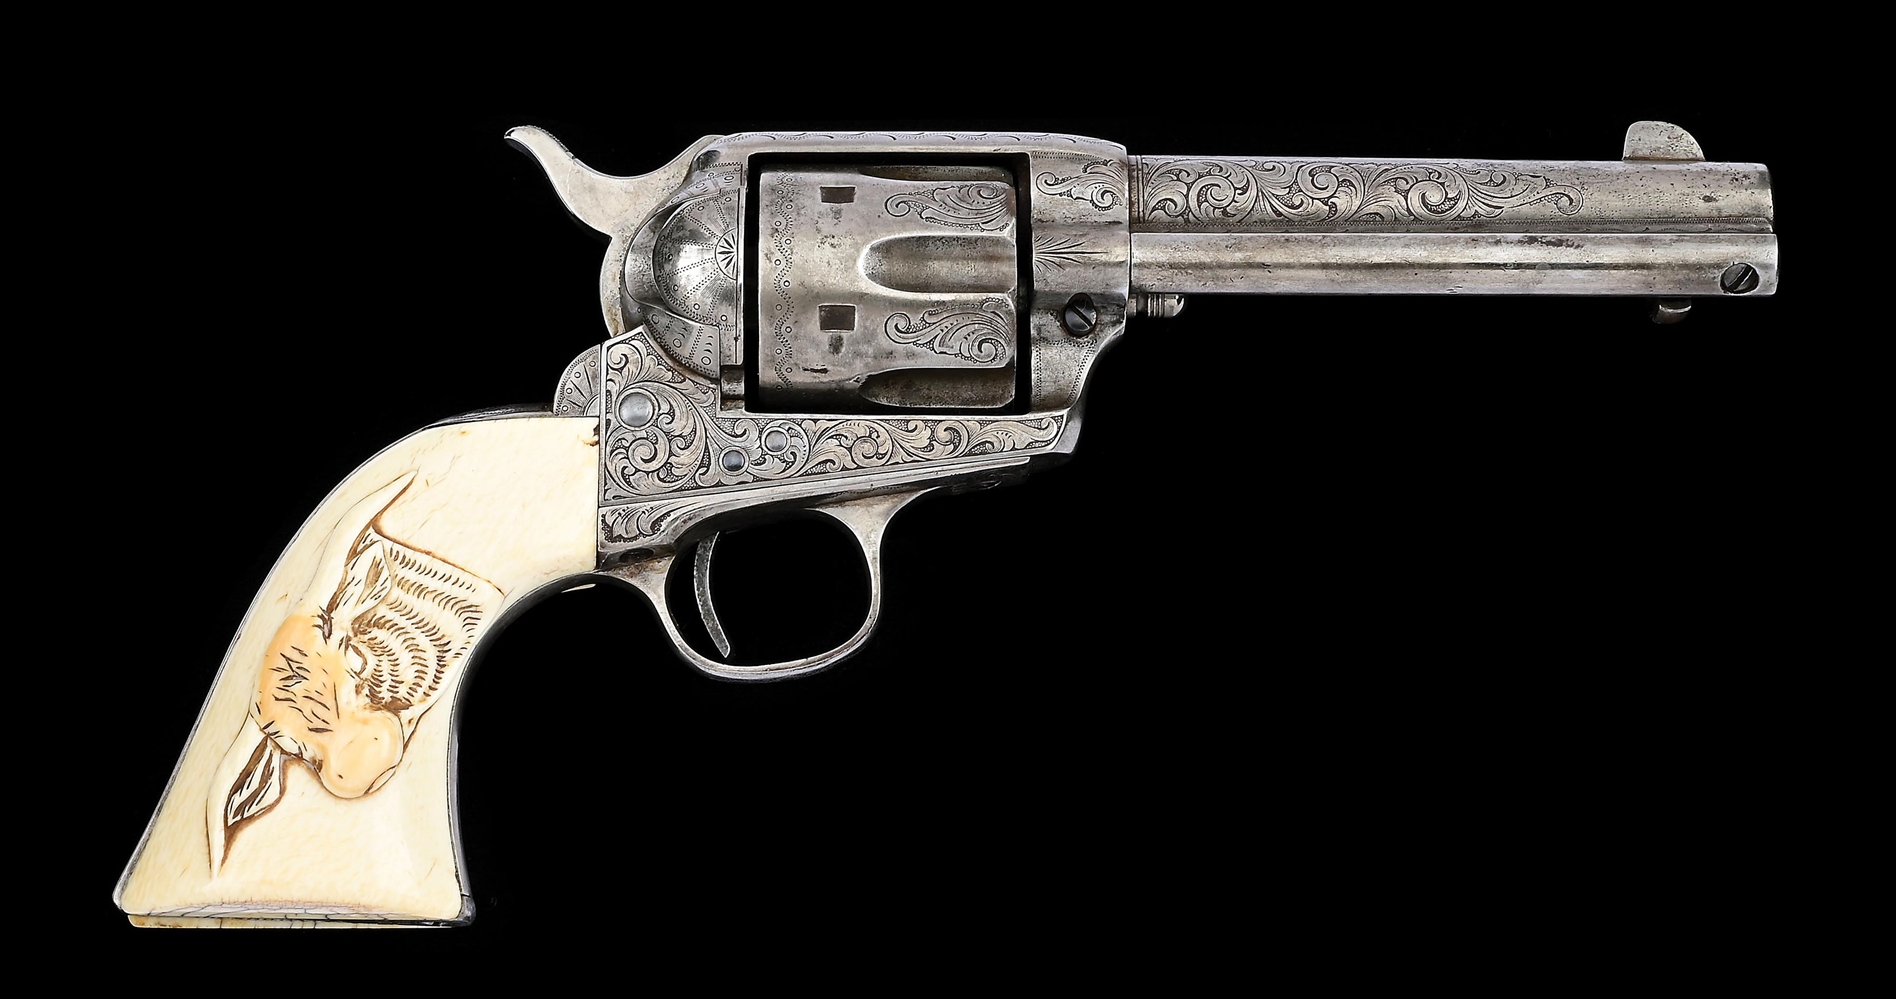 (A) MASTER ENGRAVED & SILVER PLATED COLT SINGLE ACTION ARMY REVOLVER INSCRIBED "E.V. EMPIRE RANCH" WITH RESEARCH (1897).